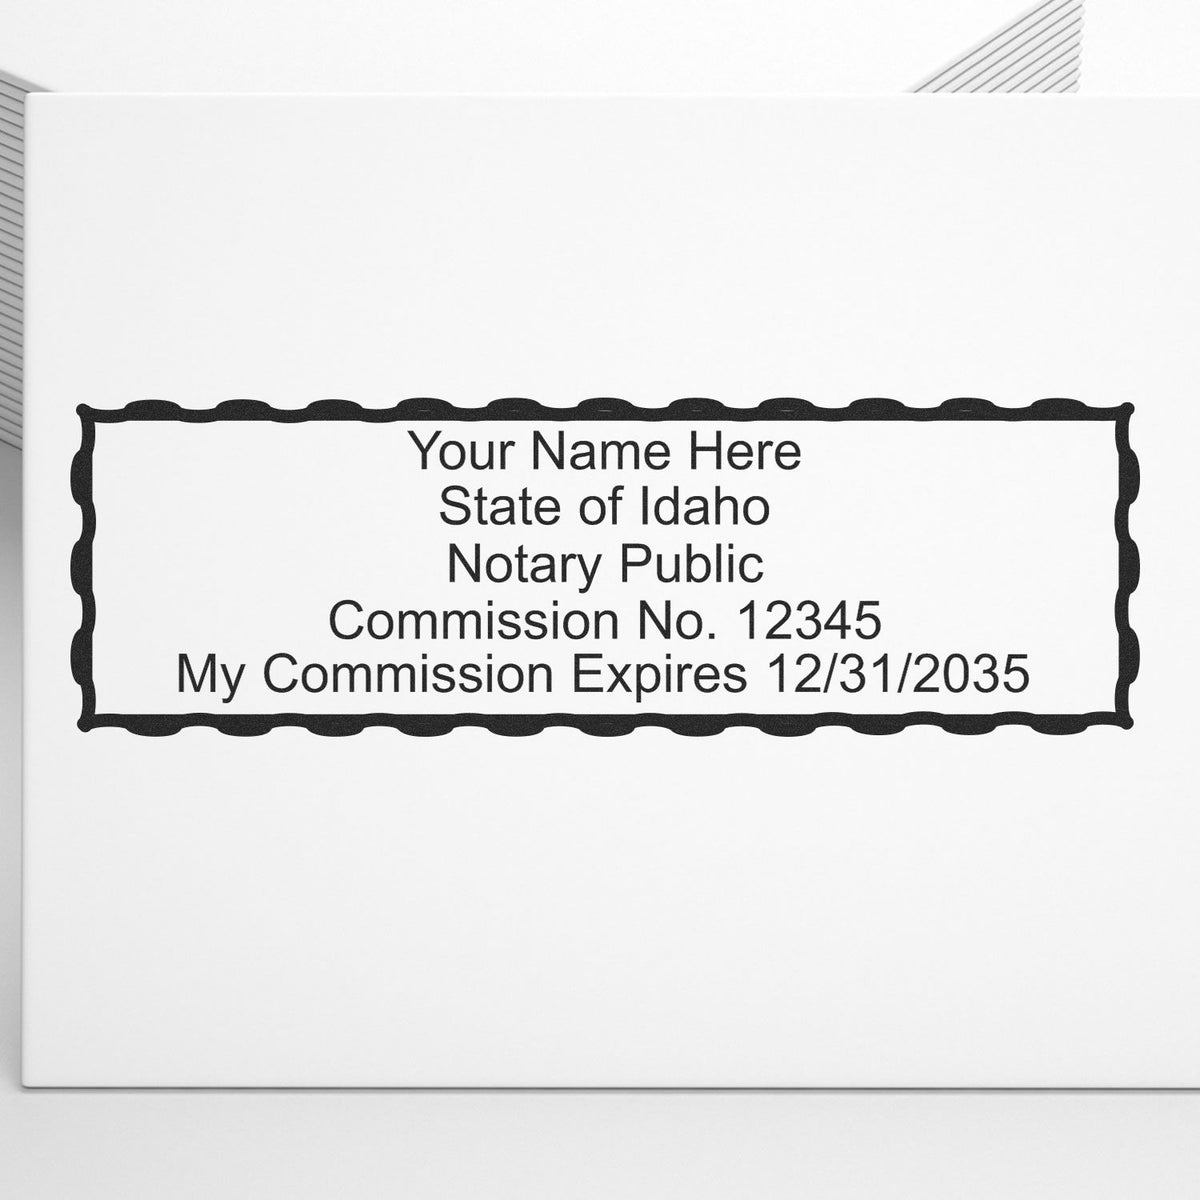 A lifestyle photo showing a stamped image of the Heavy-Duty Idaho Rectangular Notary Stamp on a piece of paper